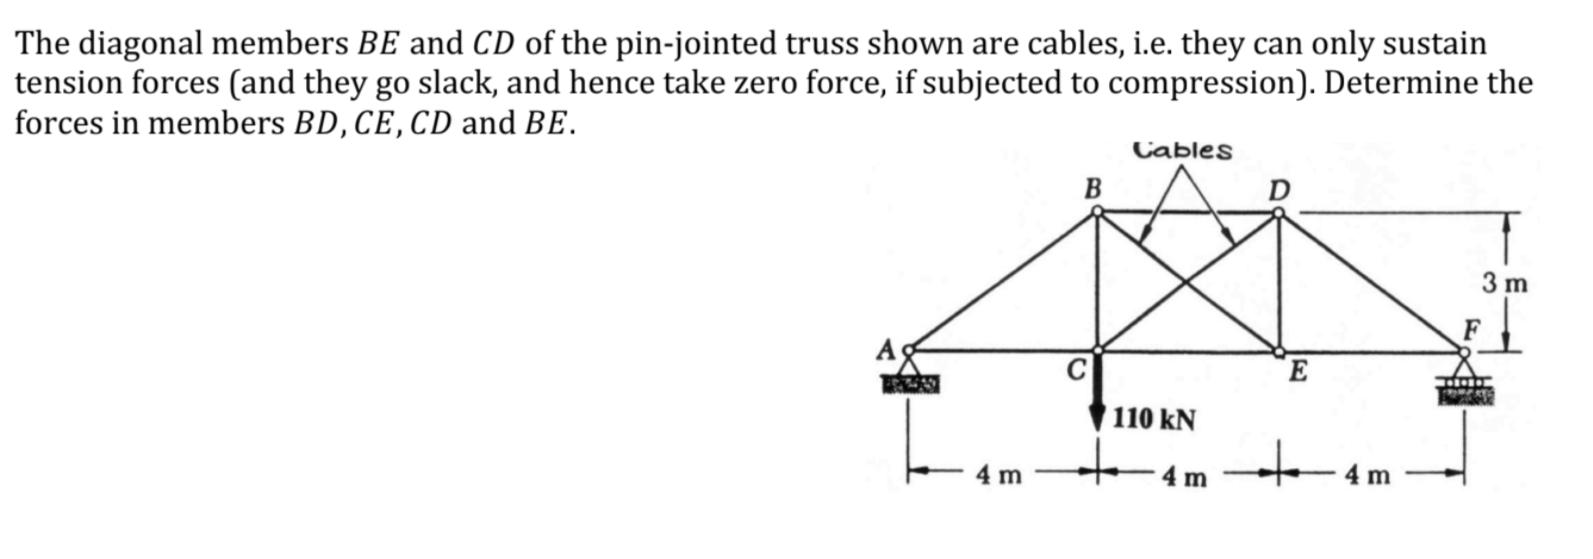 The diagonal members BE and CD of the pin-jointed truss shown are cables, i.e. they can only sustain tension